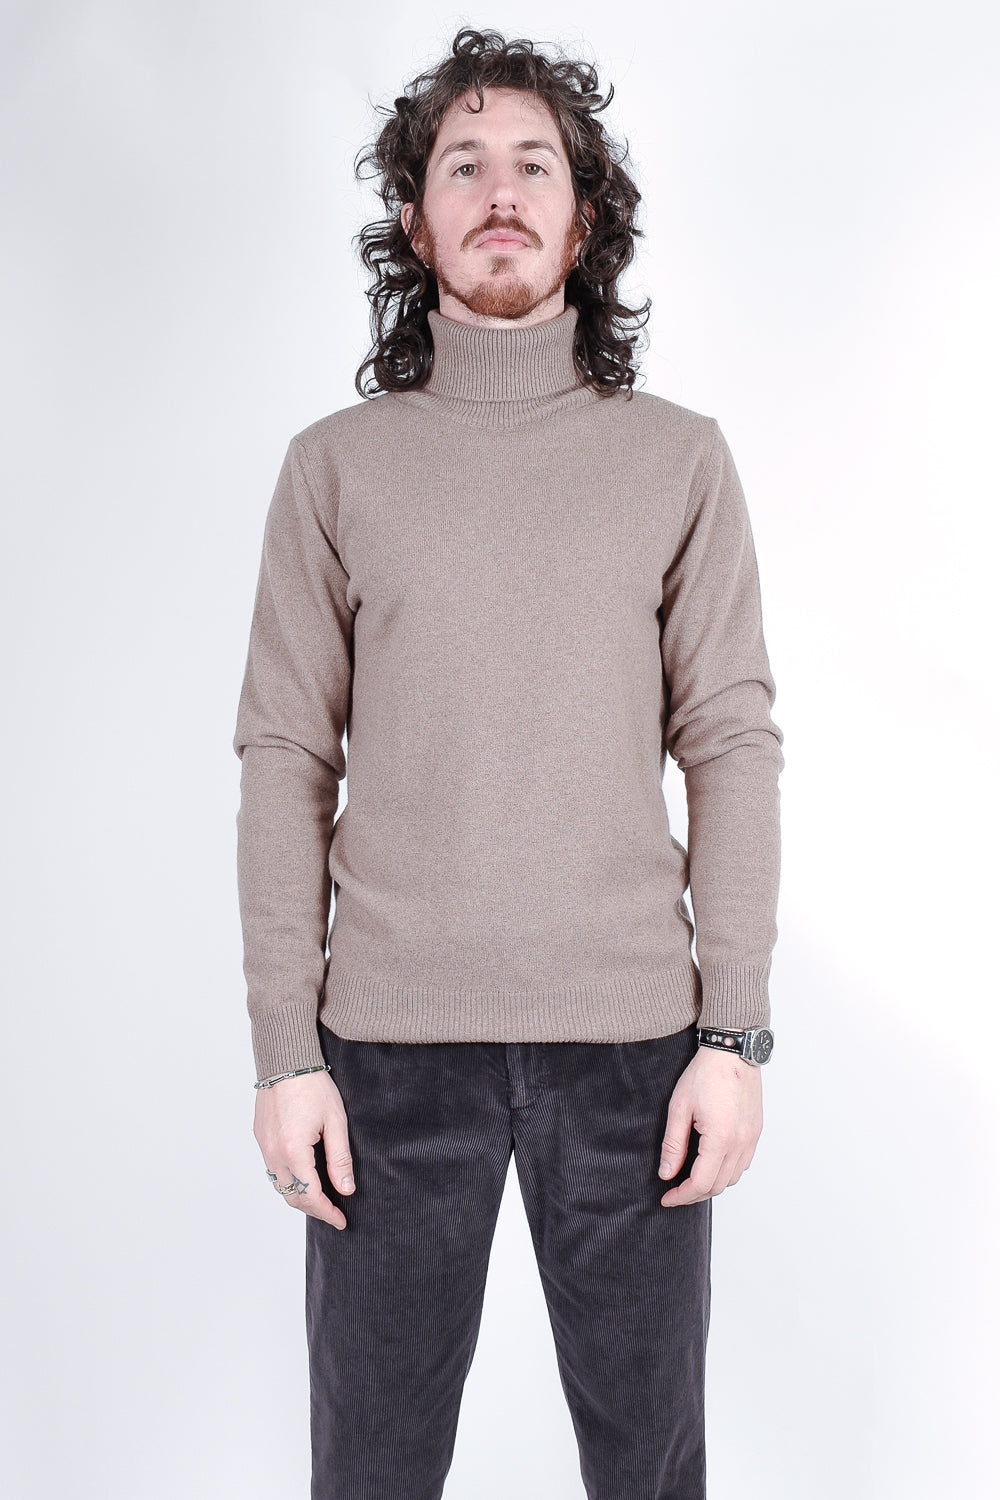 Buy the Daniele Fiesoli Roll Neck Sweater in Taupe at Intro. Spend £50 for free UK delivery. Official stockists. We ship worldwide.